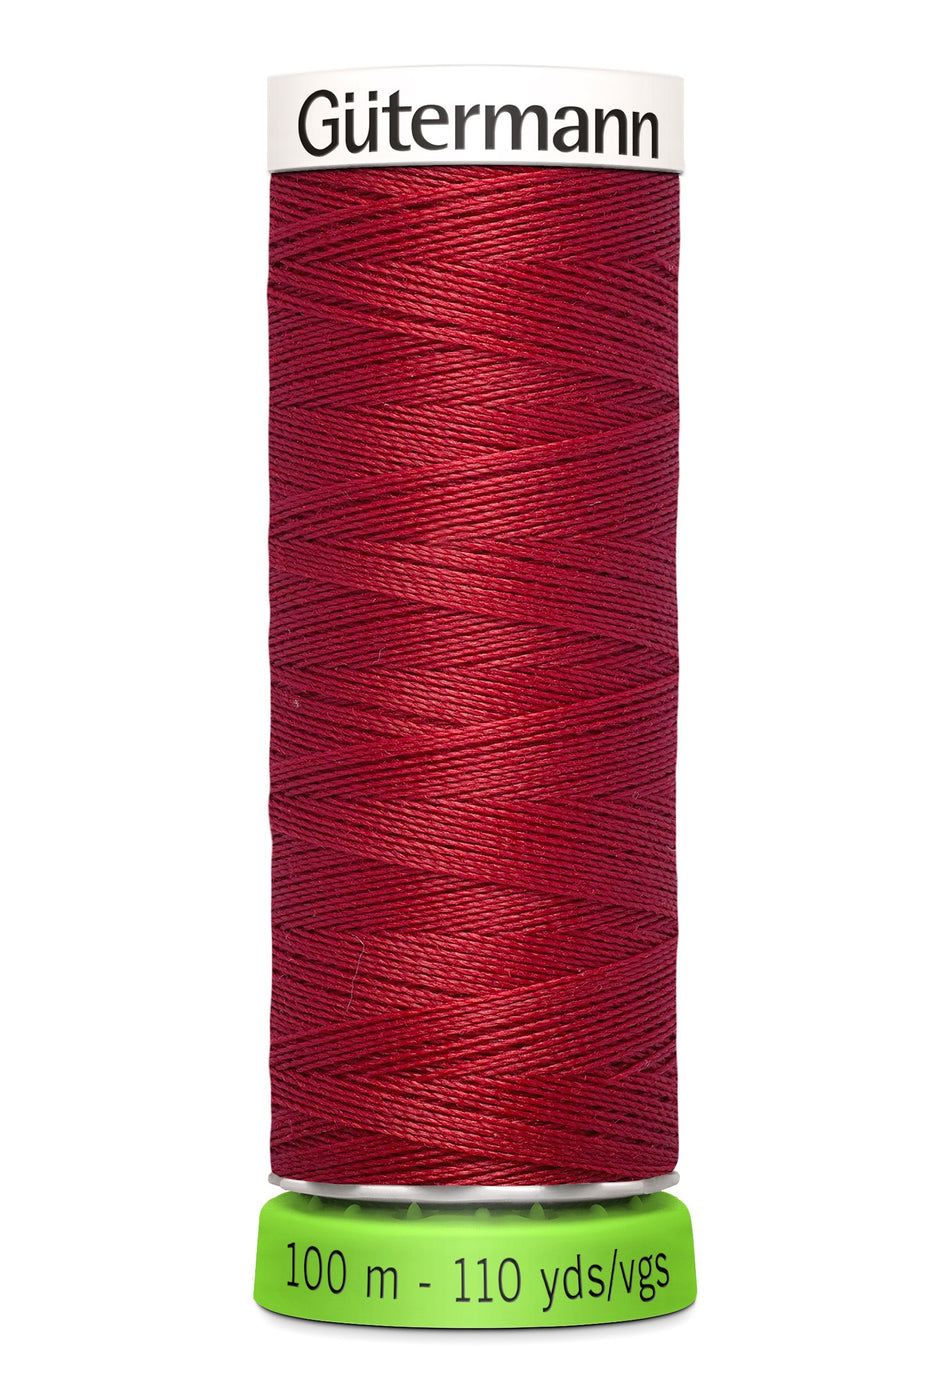 Gutermann rPet Recycled Polyester Thread 046 Chili Red 110yd/100m